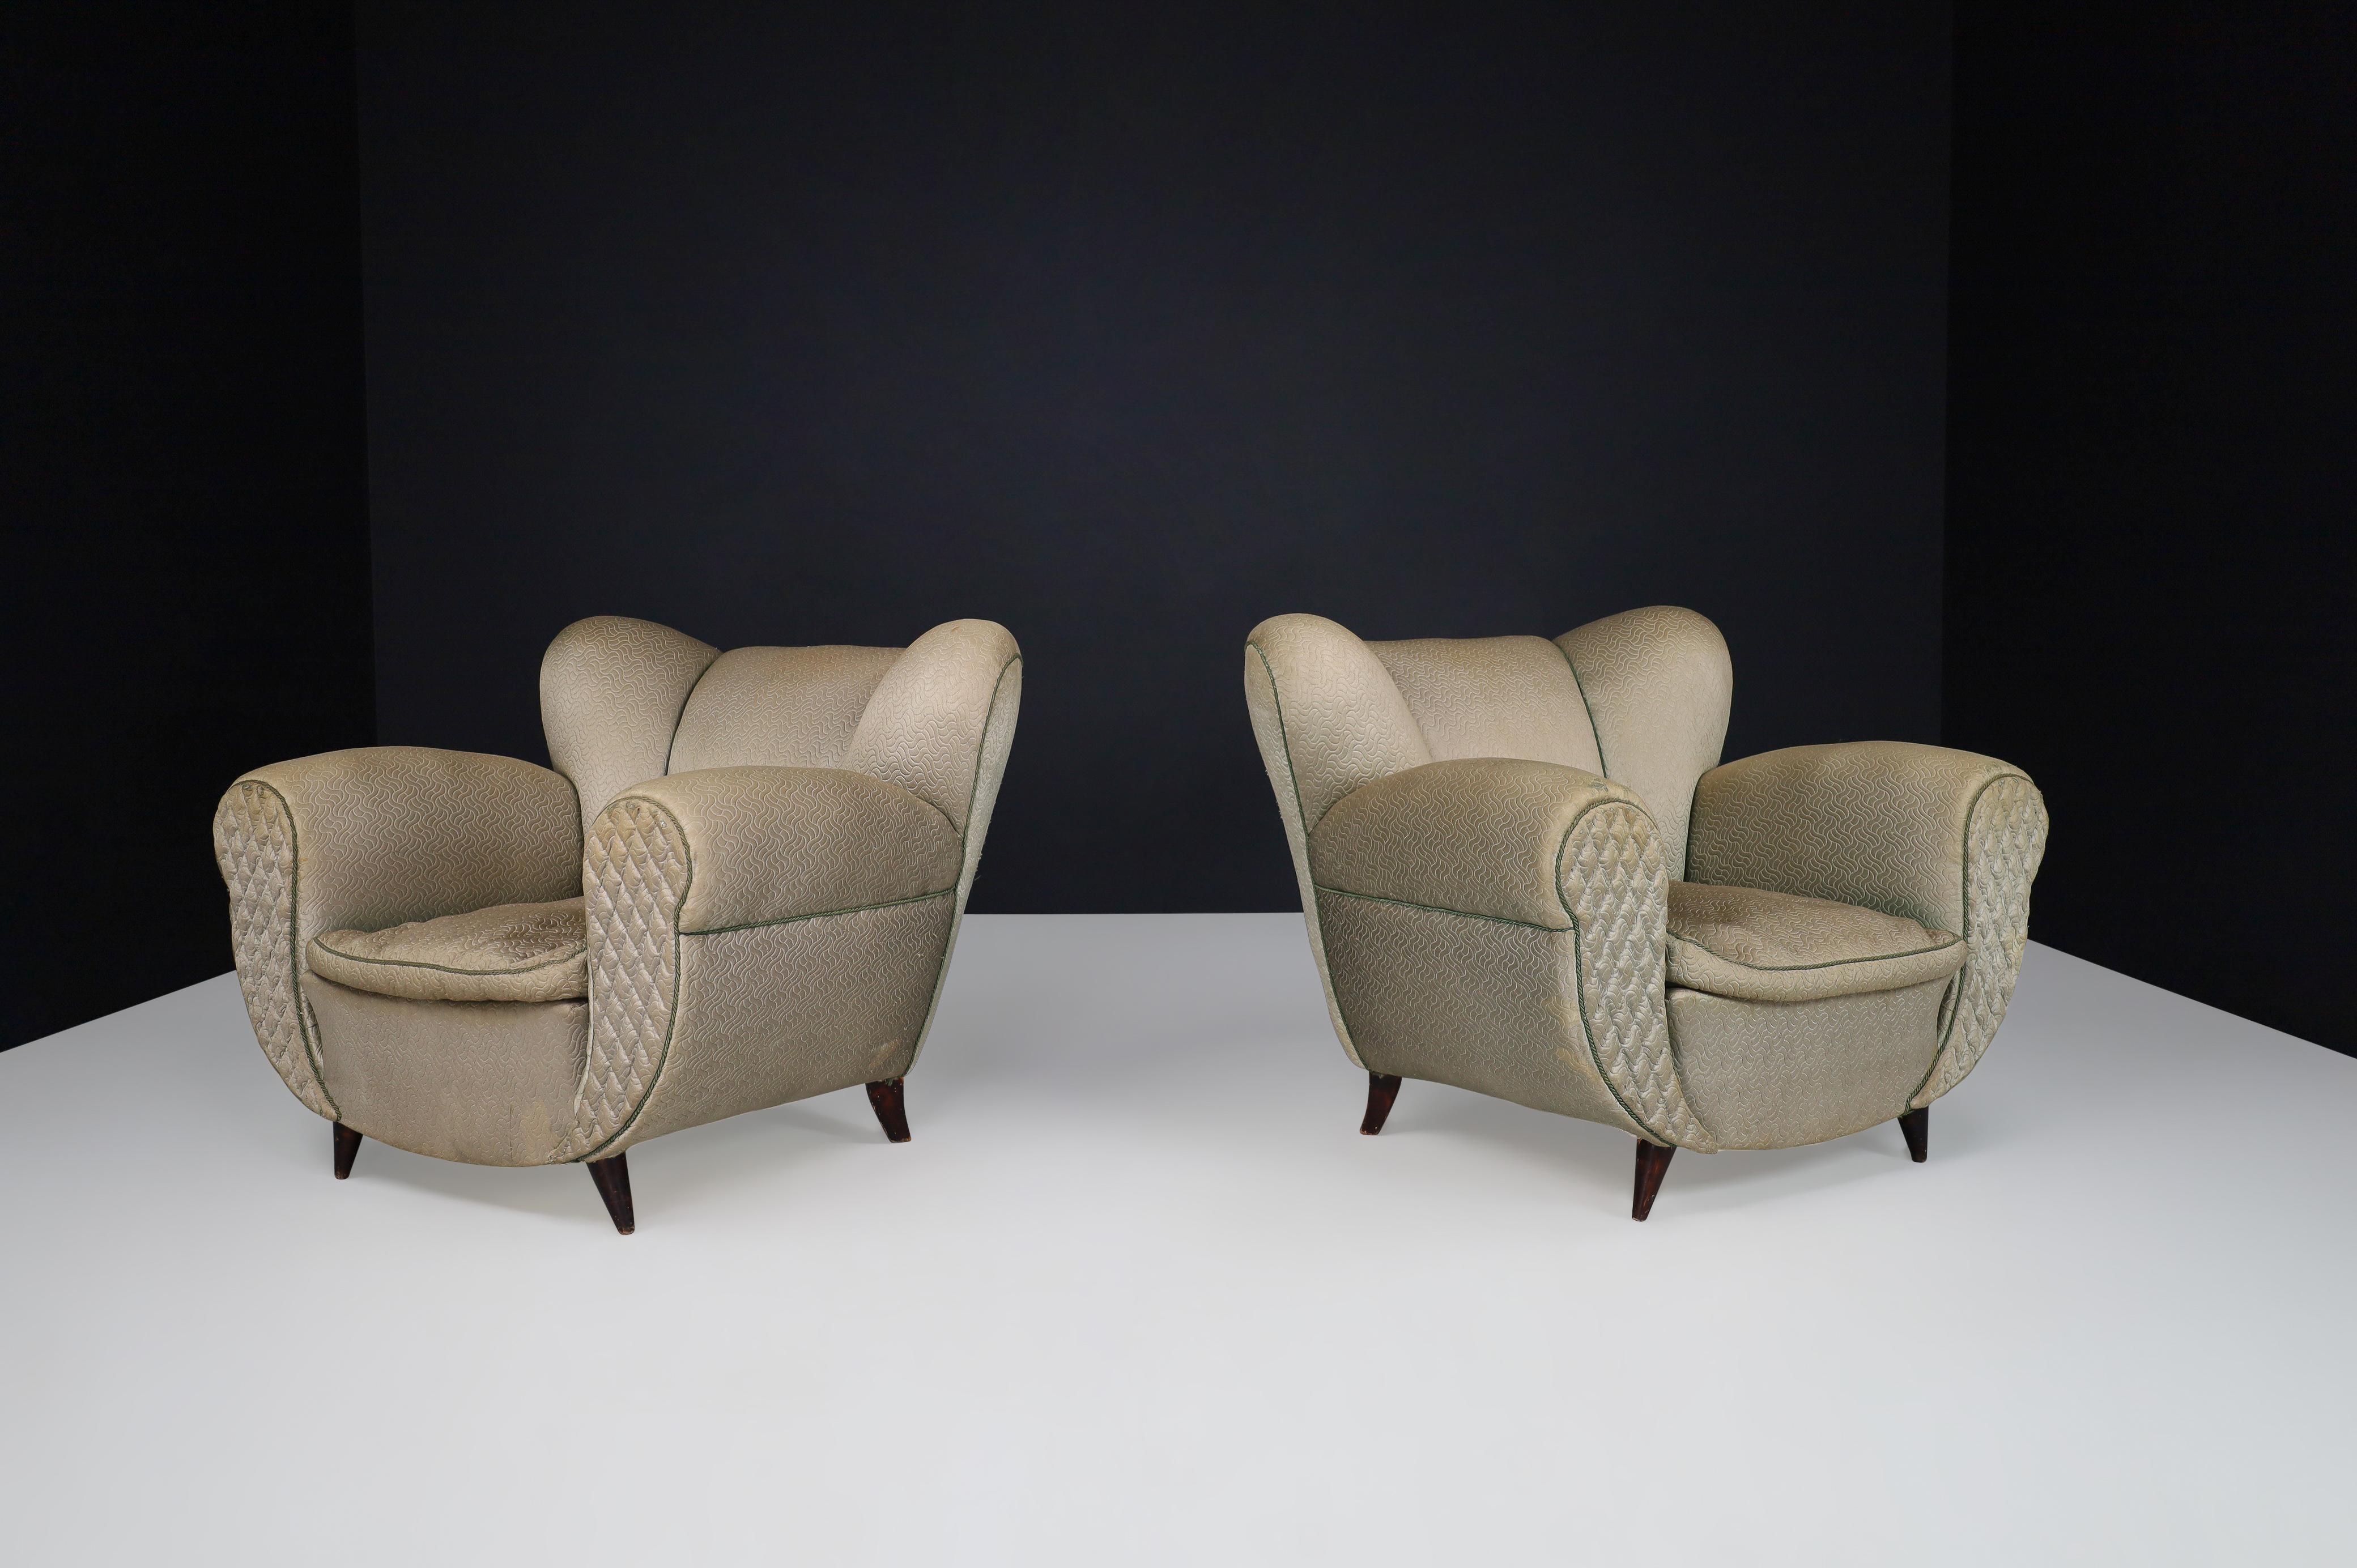 Uglielmo Ulrich Art Deco Lounge Chairs in Original Fabric, Italy 1930s In Good Condition For Sale In Almelo, NL